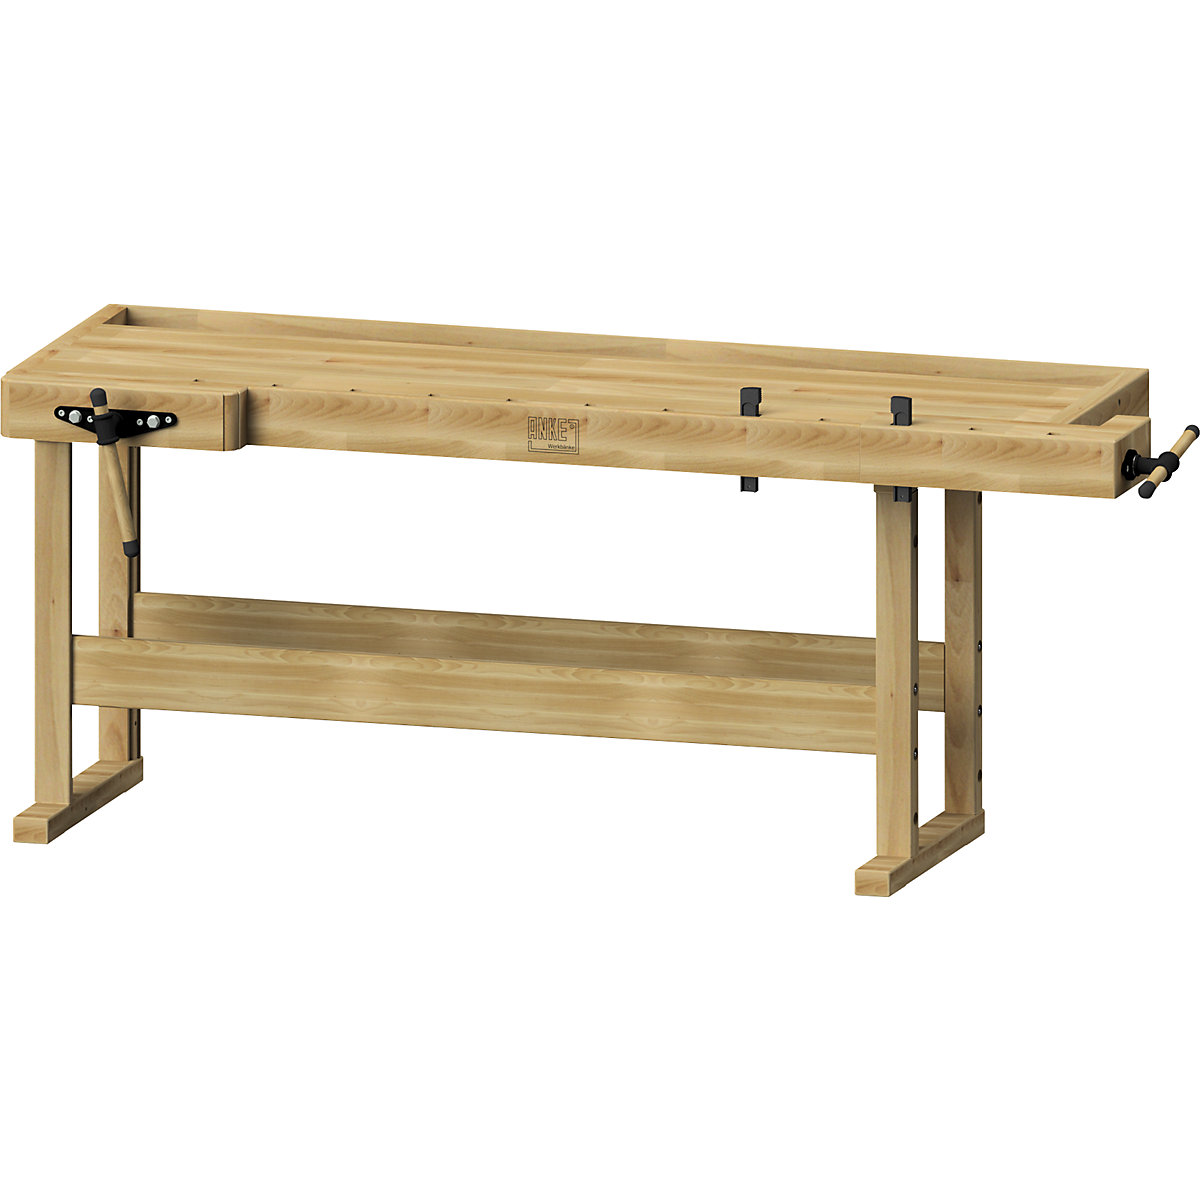 Professional carpenters' planing bench – ANKE